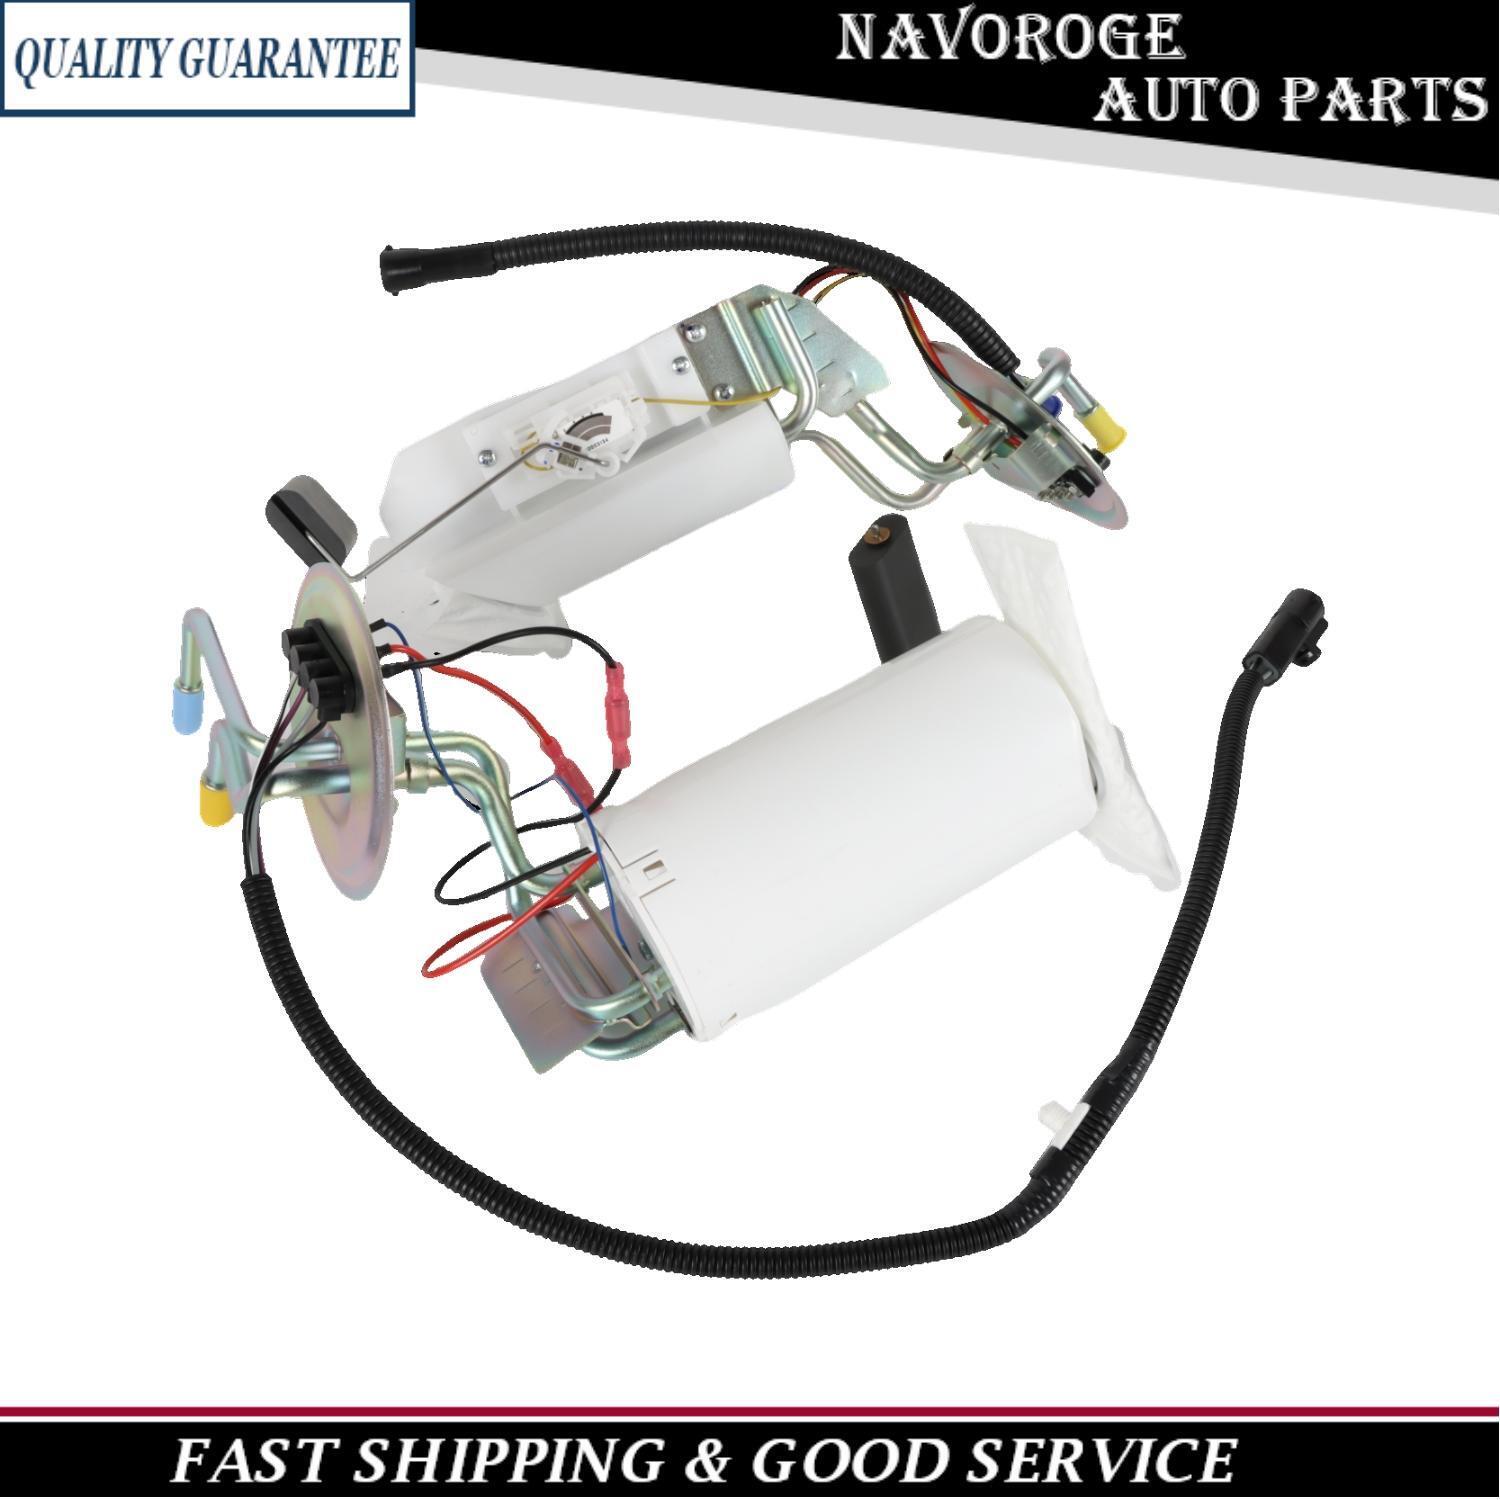 Front & Rear Fuel Pump Module Assembly for Ford F-150/250/350 1992-97 4.9/5/5.8L